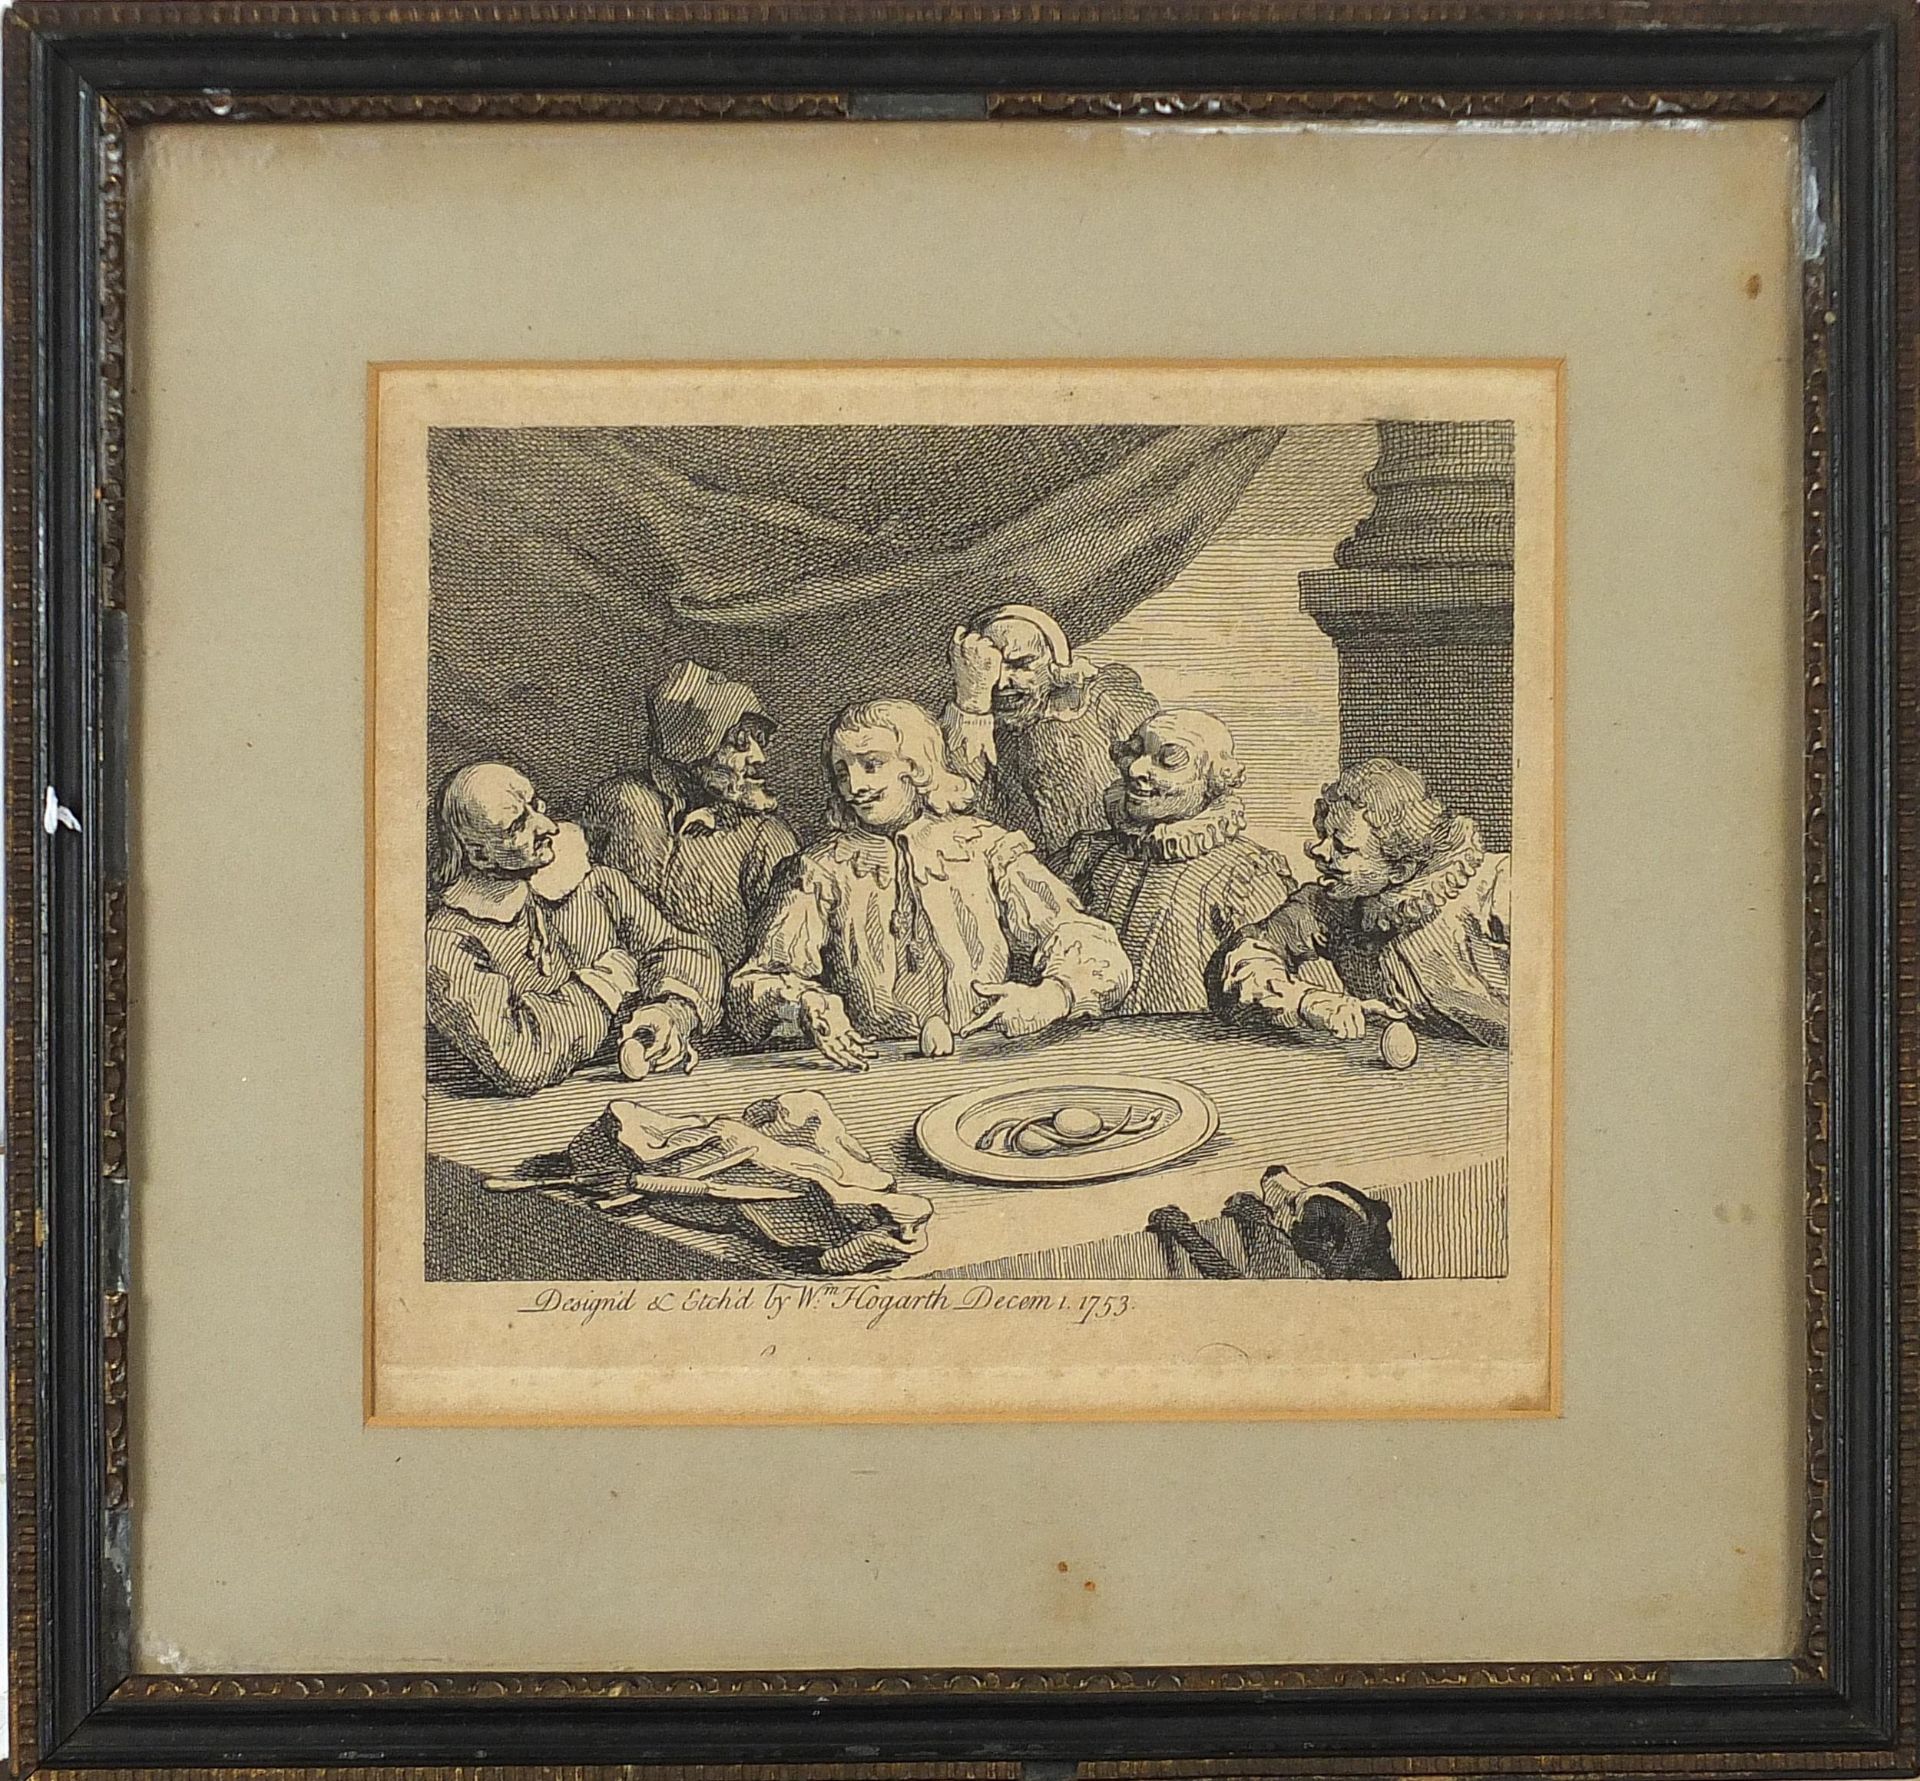 After William Hogarth - Columbus breaking the eggs, 18th century engraving, mounted, framed and - Image 2 of 4